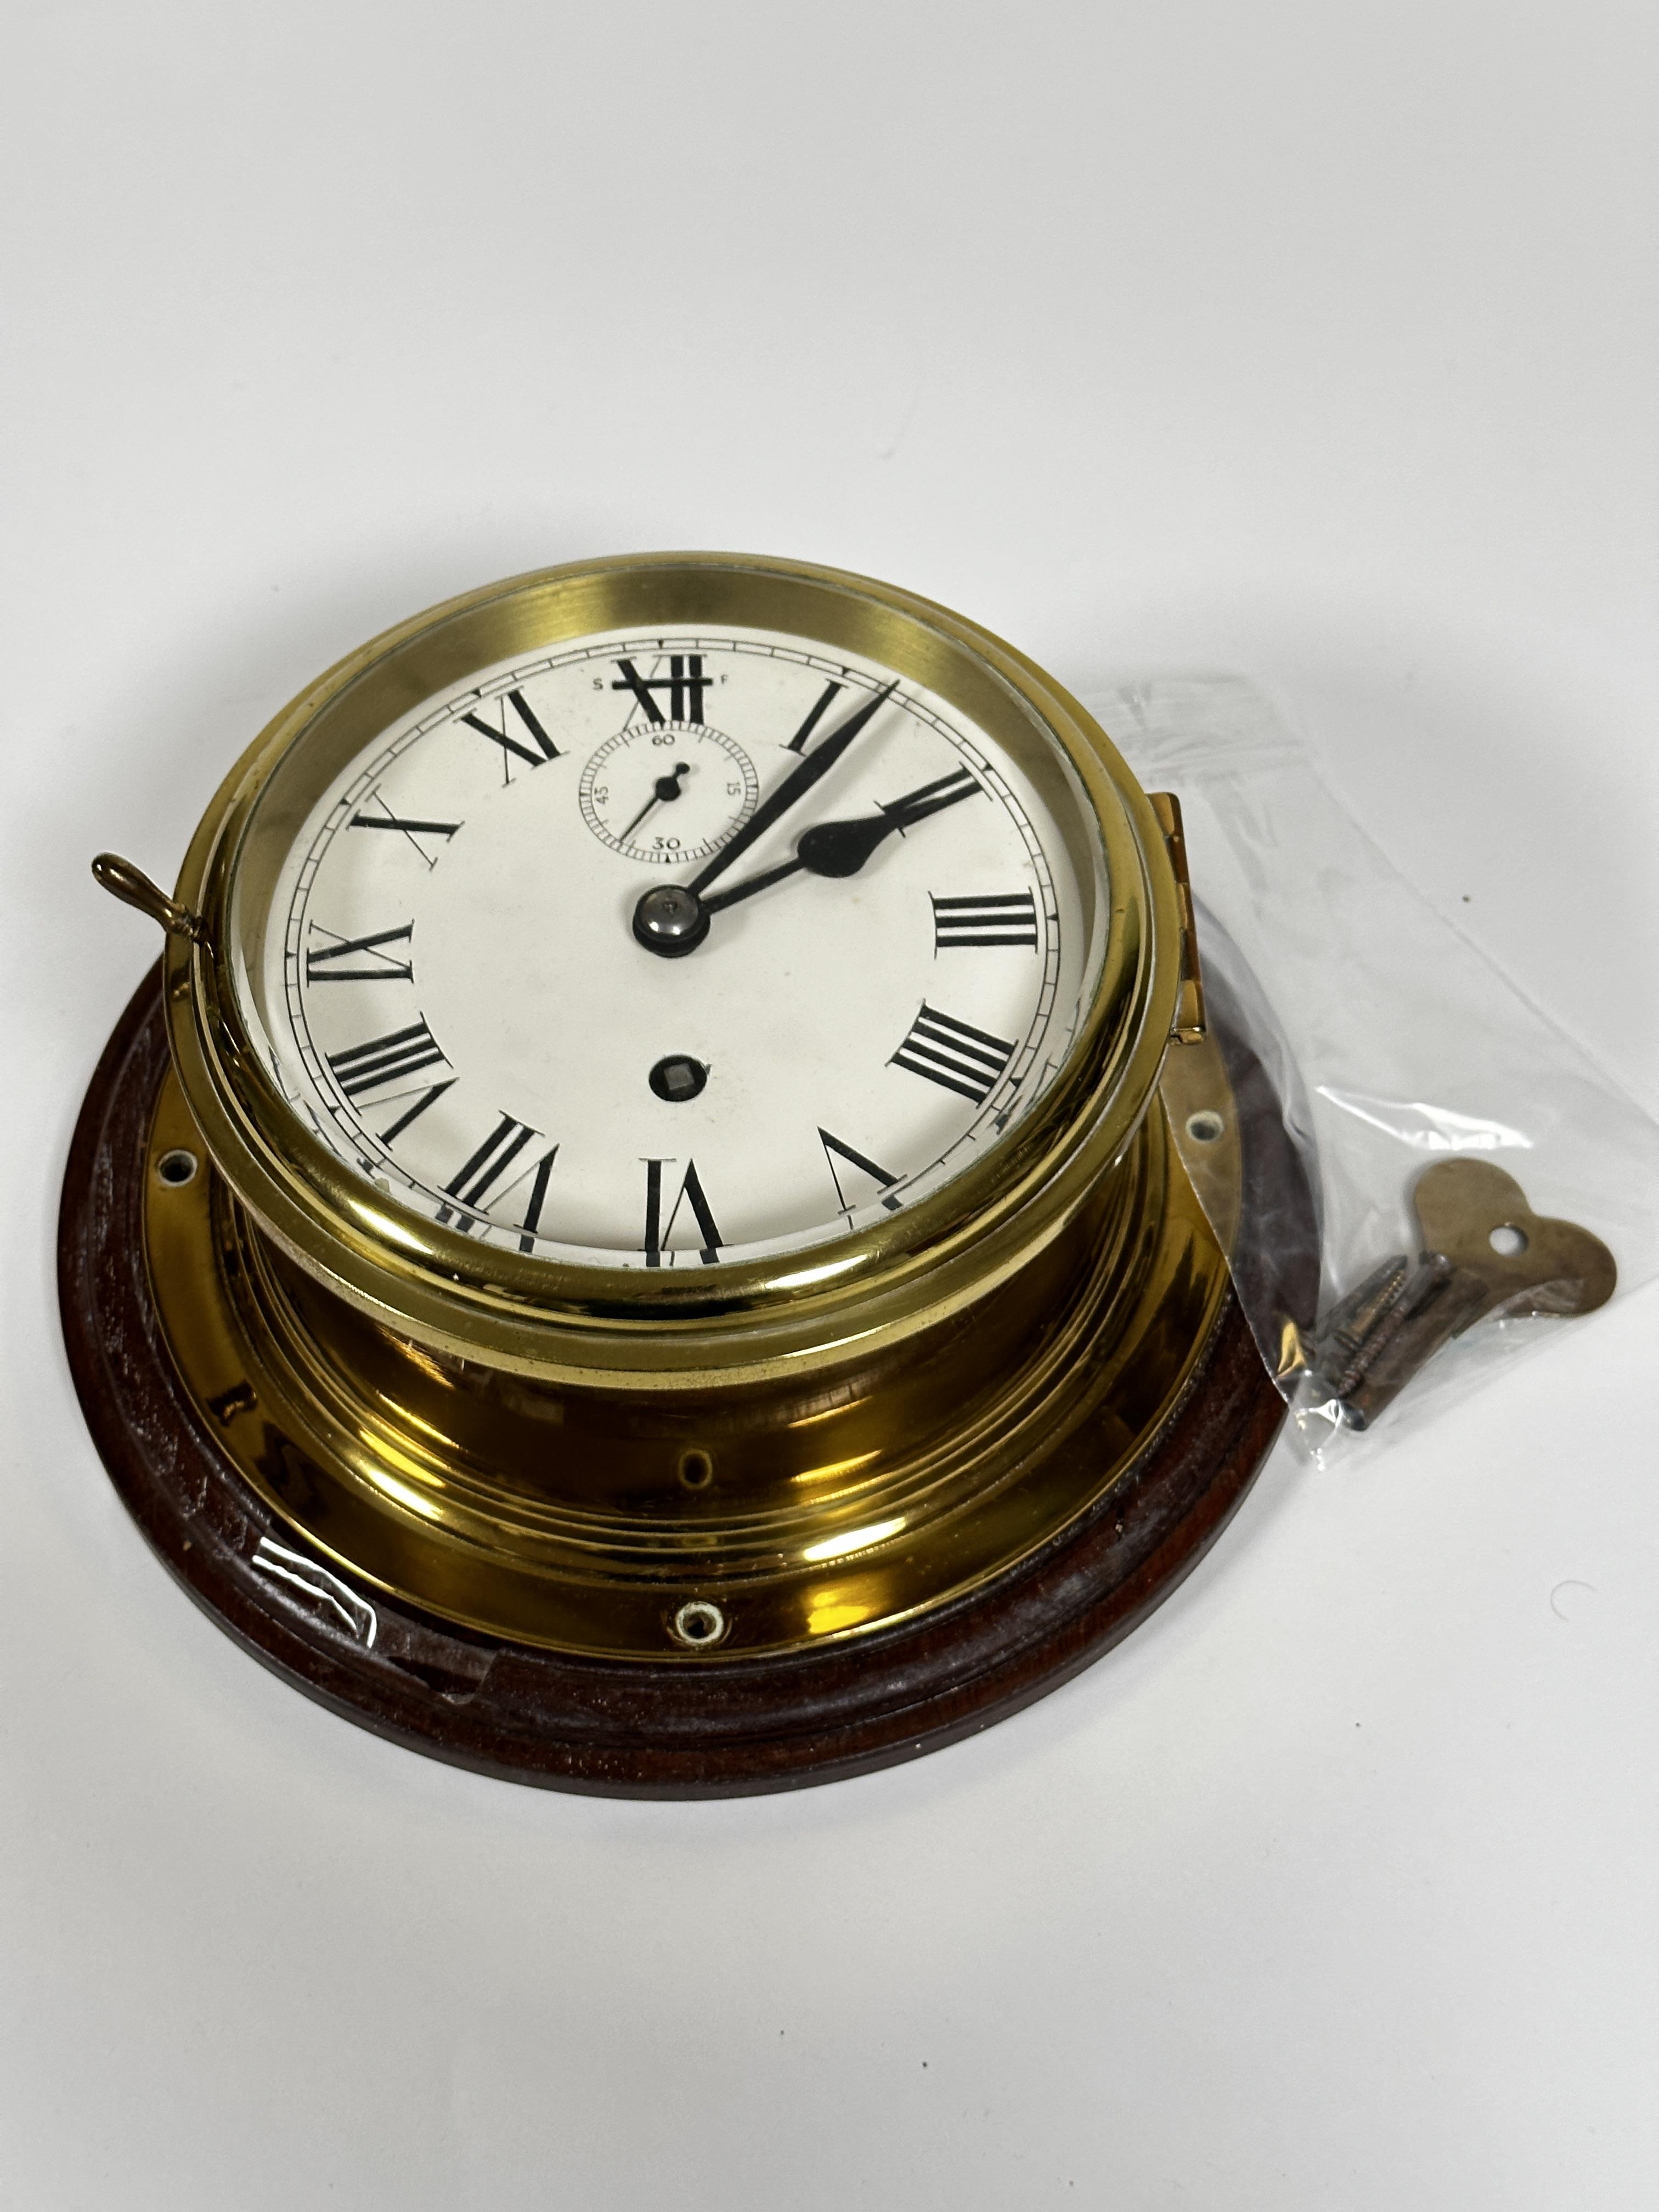 An Edwardian style brass ships wall clock with enamel dial and subsidiaries dial, complete with